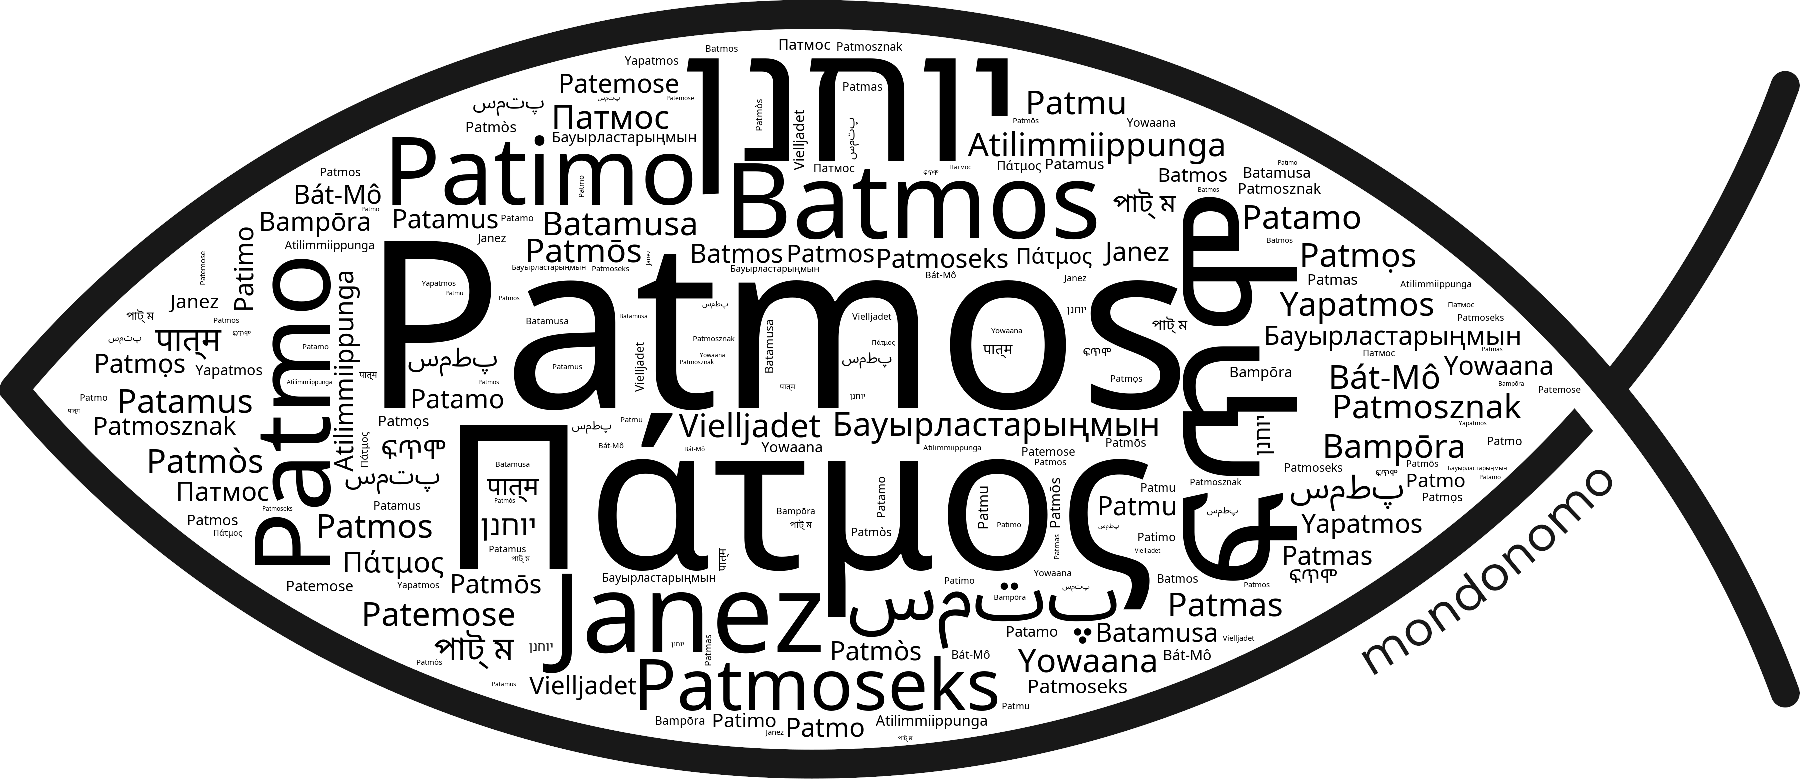 Name Patmos in the world's Bibles